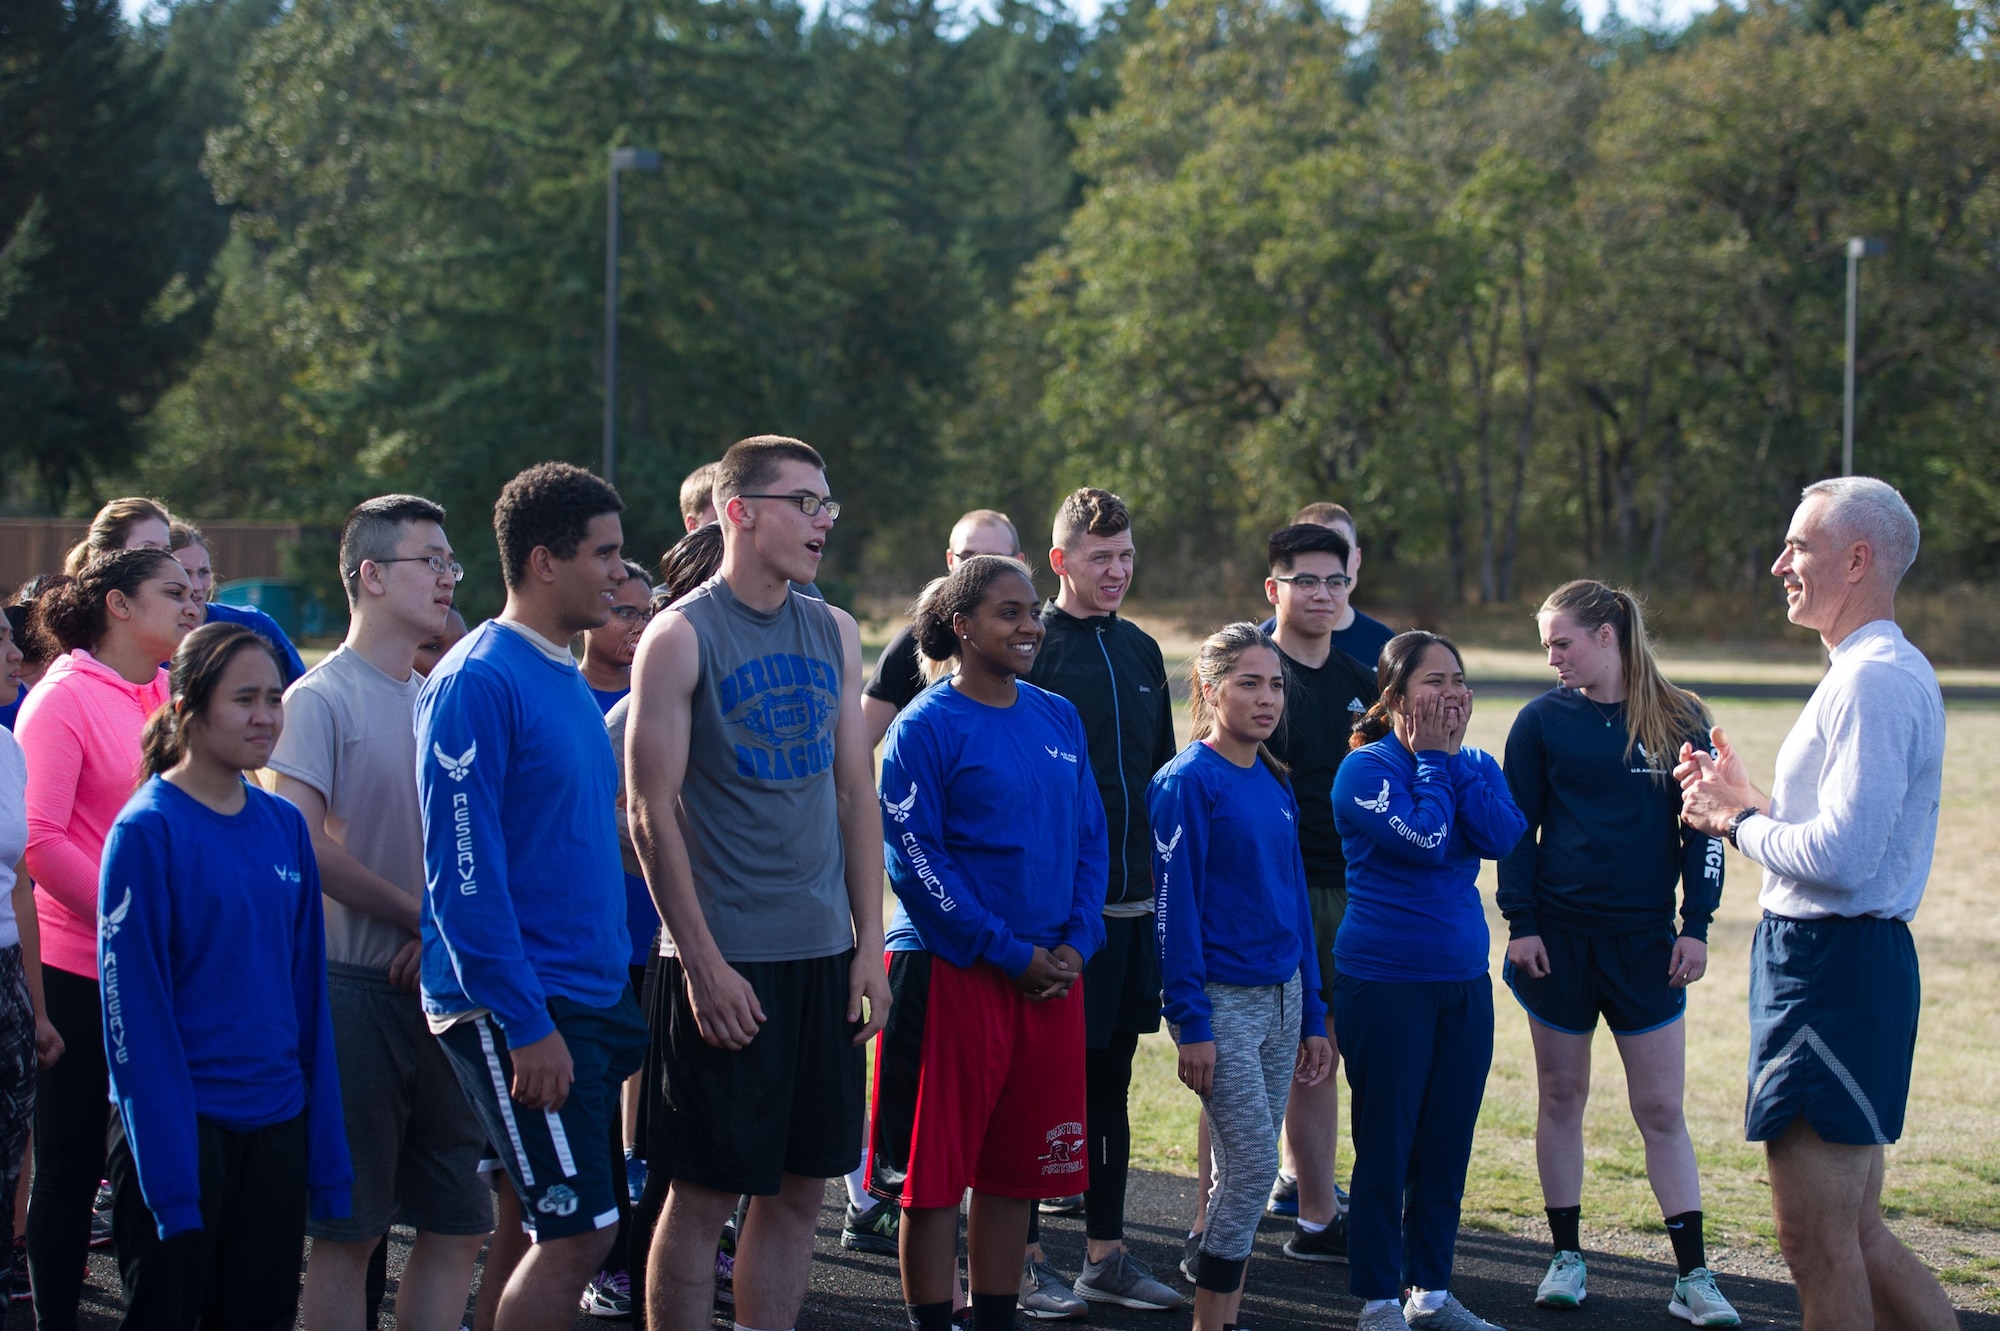 Members of the Development and Training Flight listen to Master Sgt. Edward Callahan, 446th Mission Support Group Career Assistance advisor, instruct their physical training session at the McChord Field track Oct. 15. (U.S. Air Force photo by 1st Lt. Alyssa Hudyma)